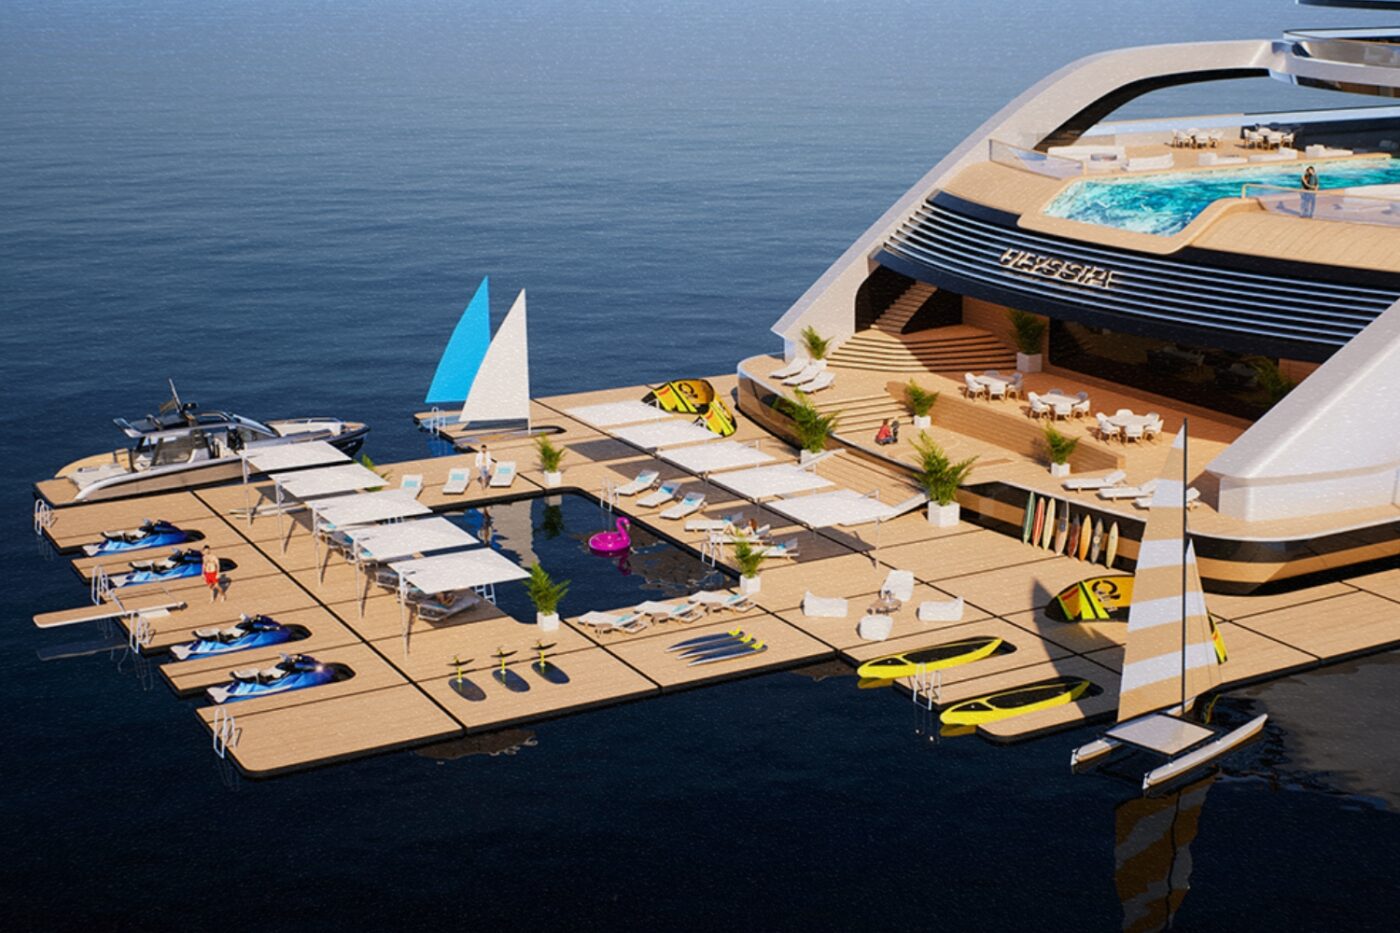 World’s Largest Superyacht Is Bigger Than The Titanic &amp; Way More Luxurious